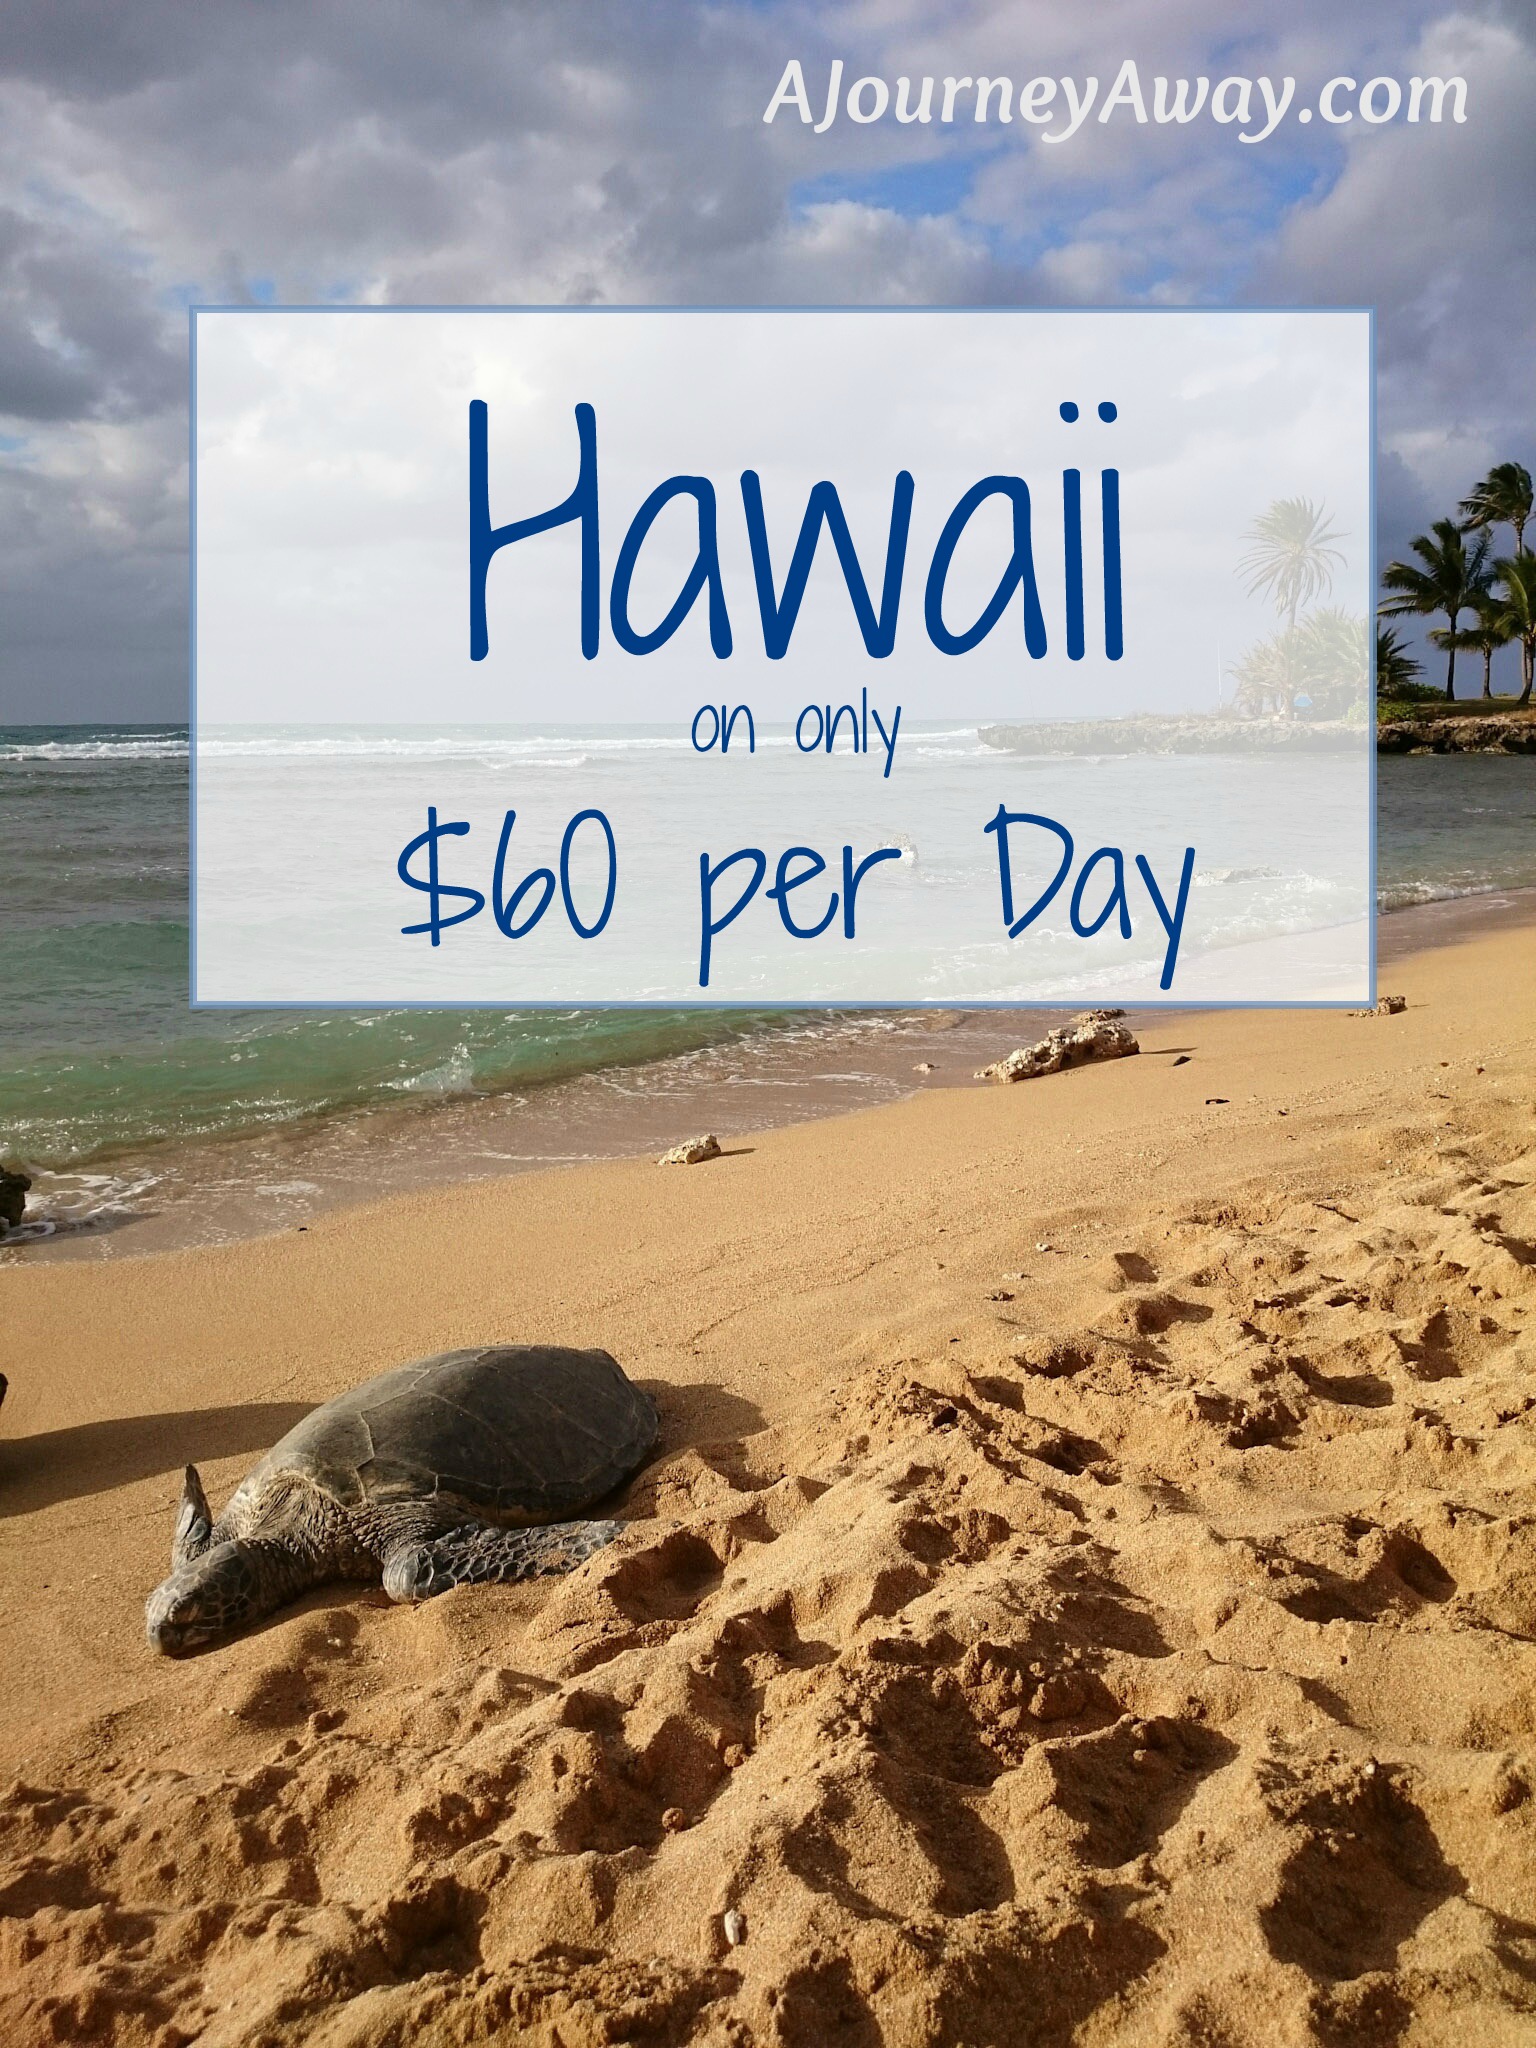  How to travel Hawaii on only $60 per day | A Journey Away 